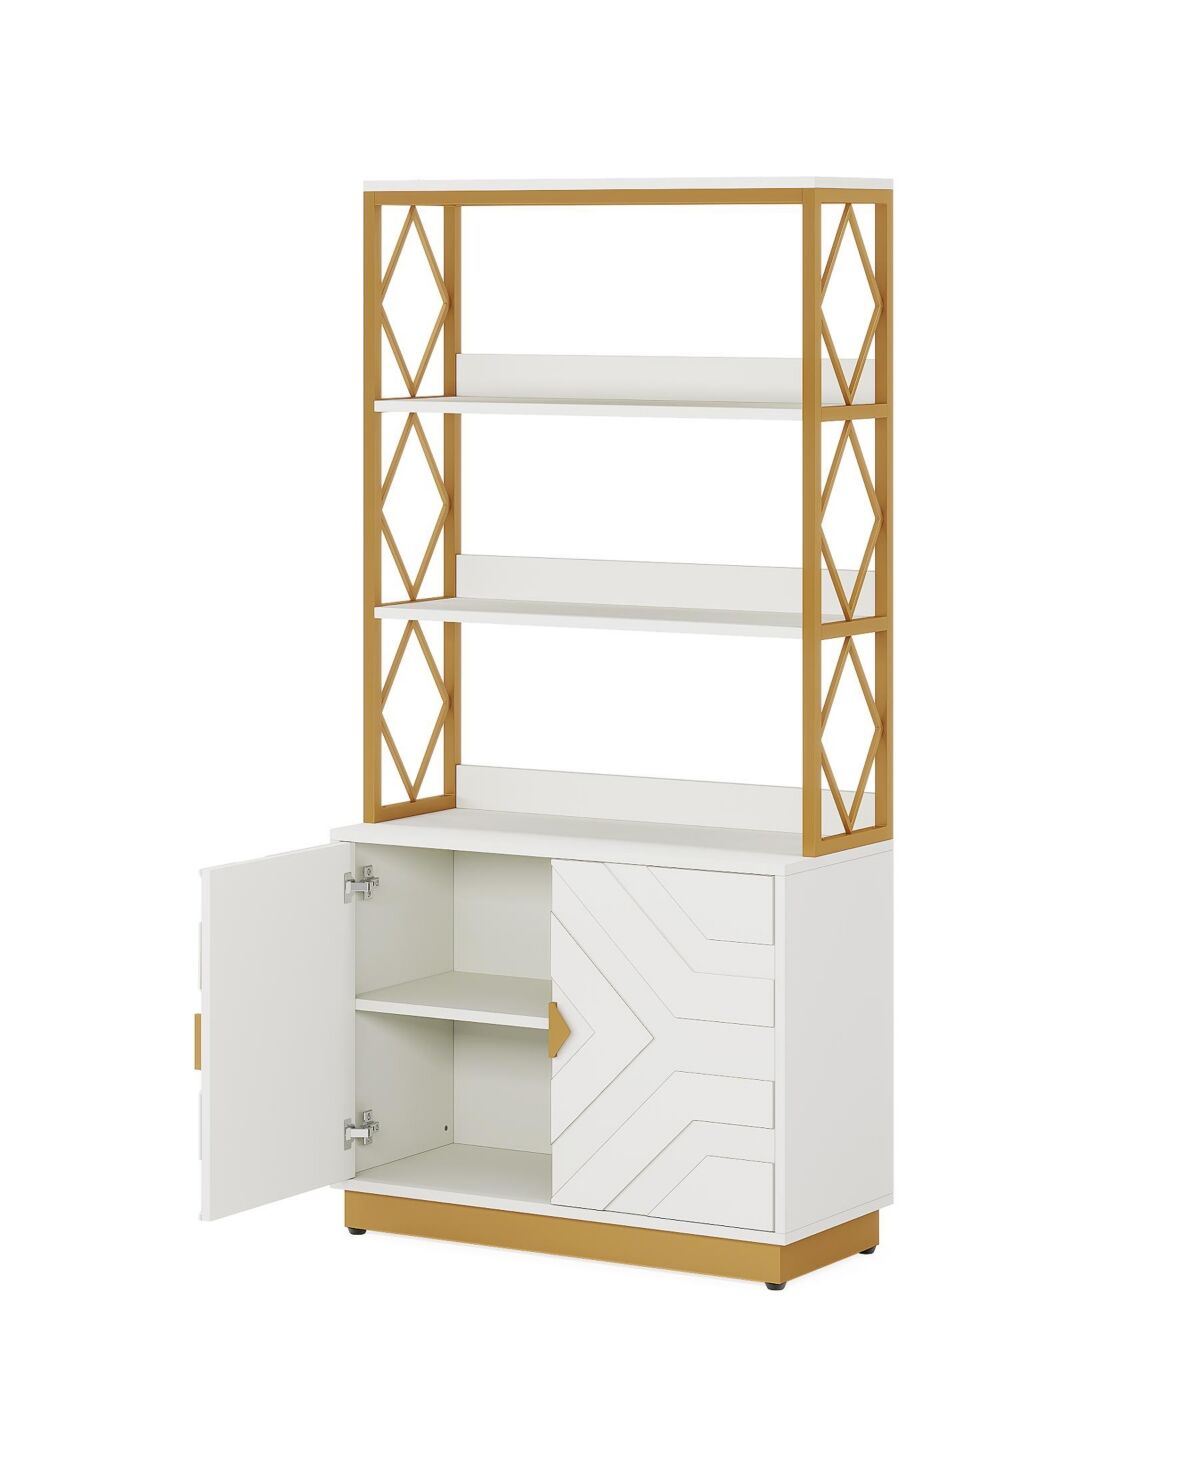 Tribesigns Tribe signs White and Gold Bookshelf with Doors: 70.9 Inches Tall Etagere Bookcase with 3 Shelves 2 Cabinets (White and Gold) - White